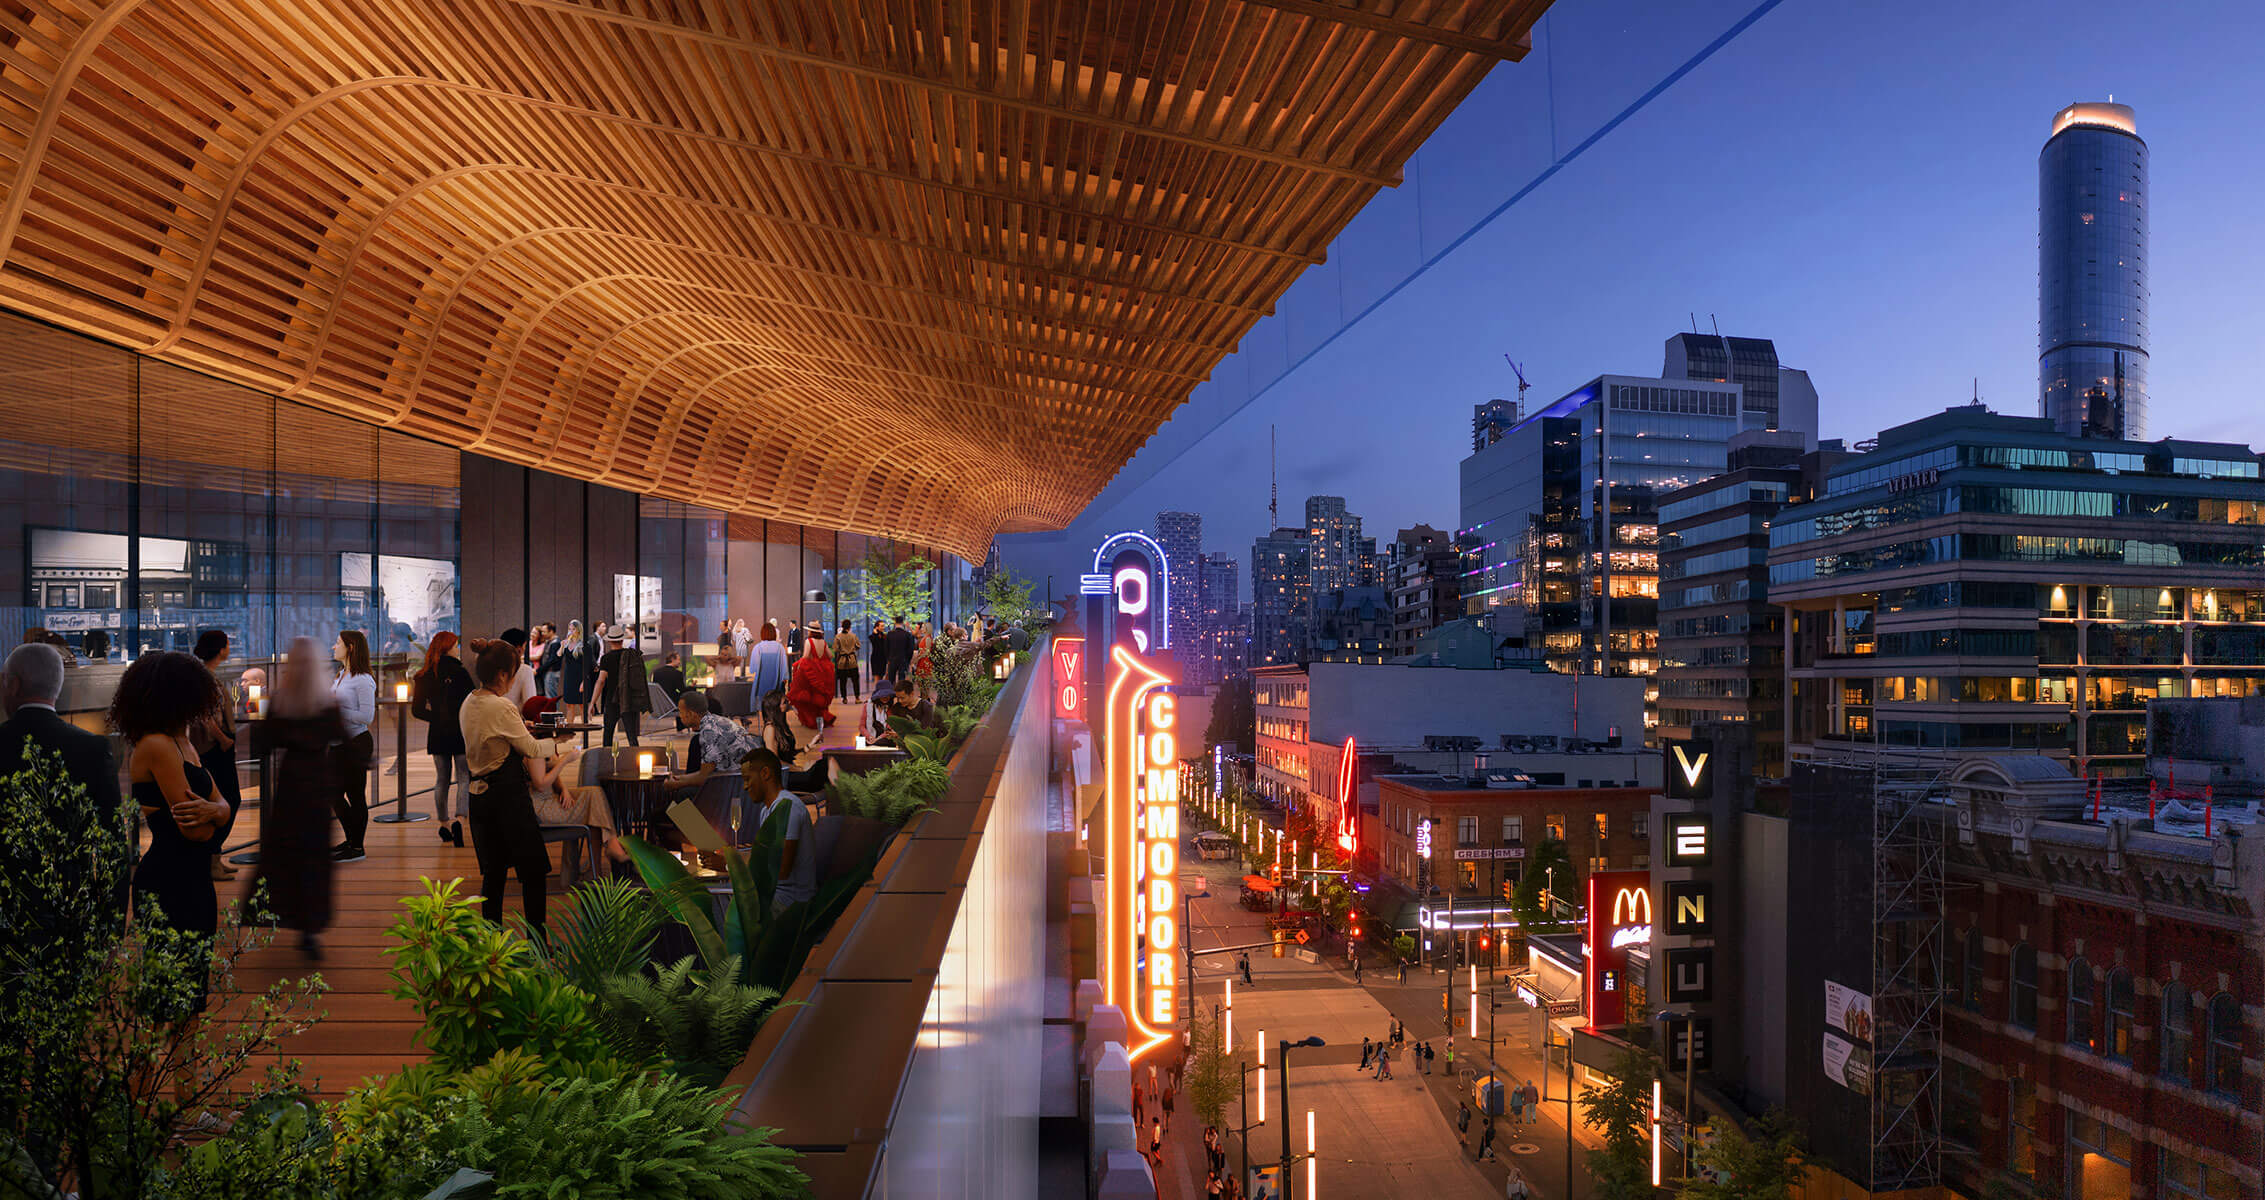 Rendering looking down Granville Street from the elevated cultural terrace.